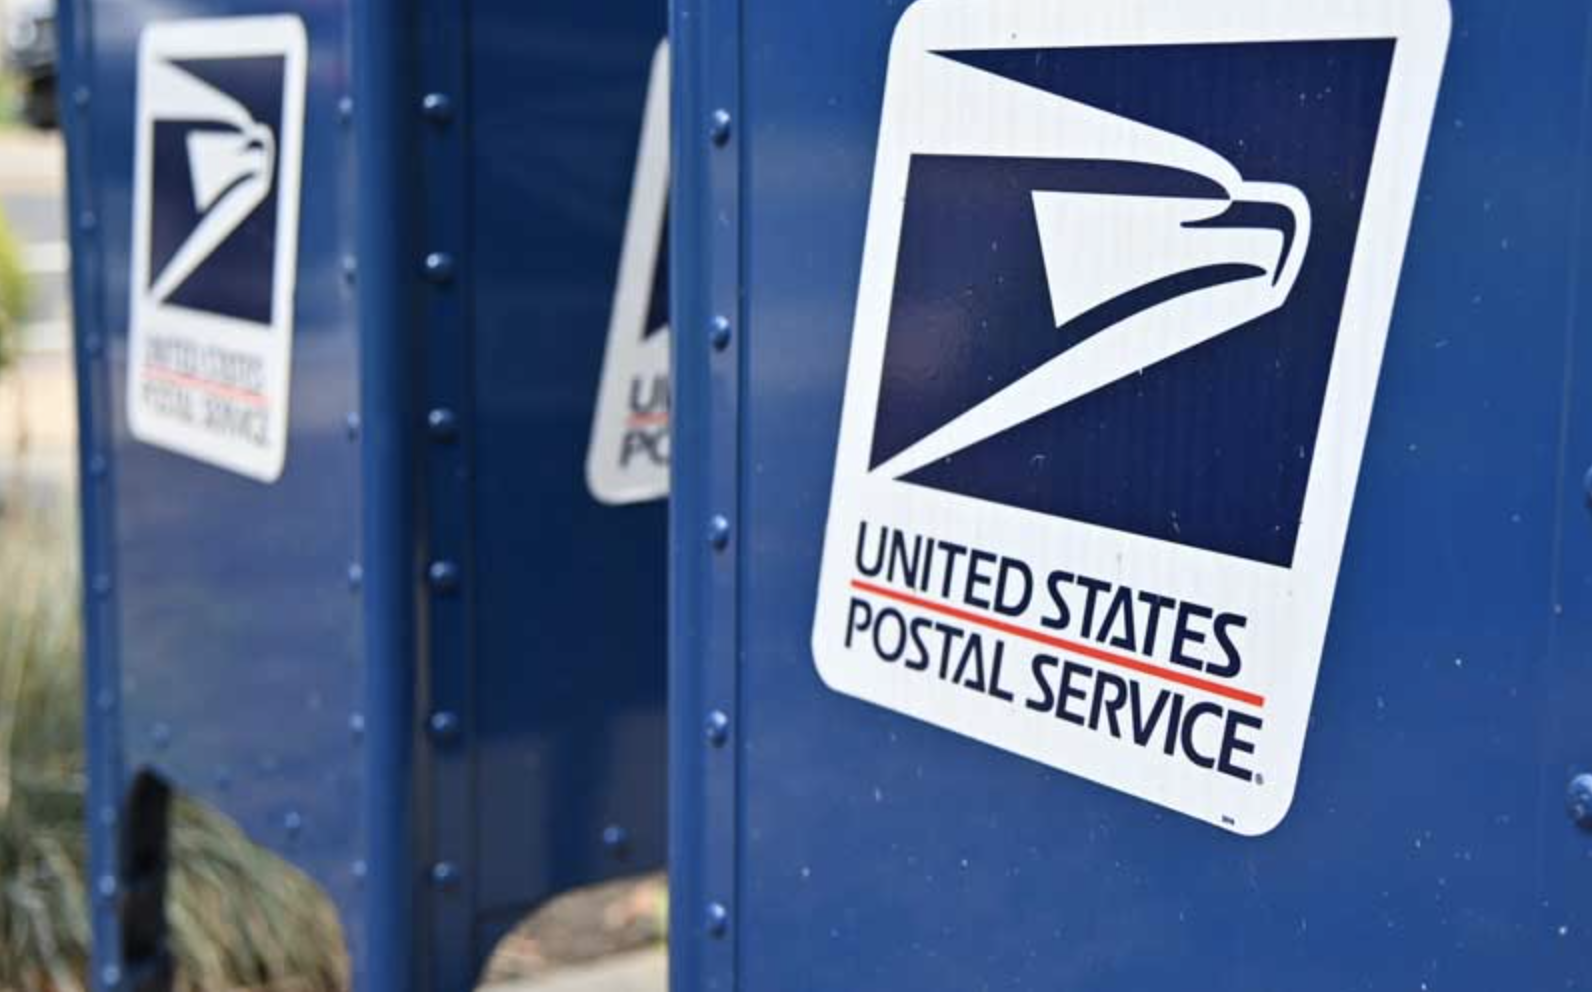 Arrest made, stolen mail recovered in Granite Bay